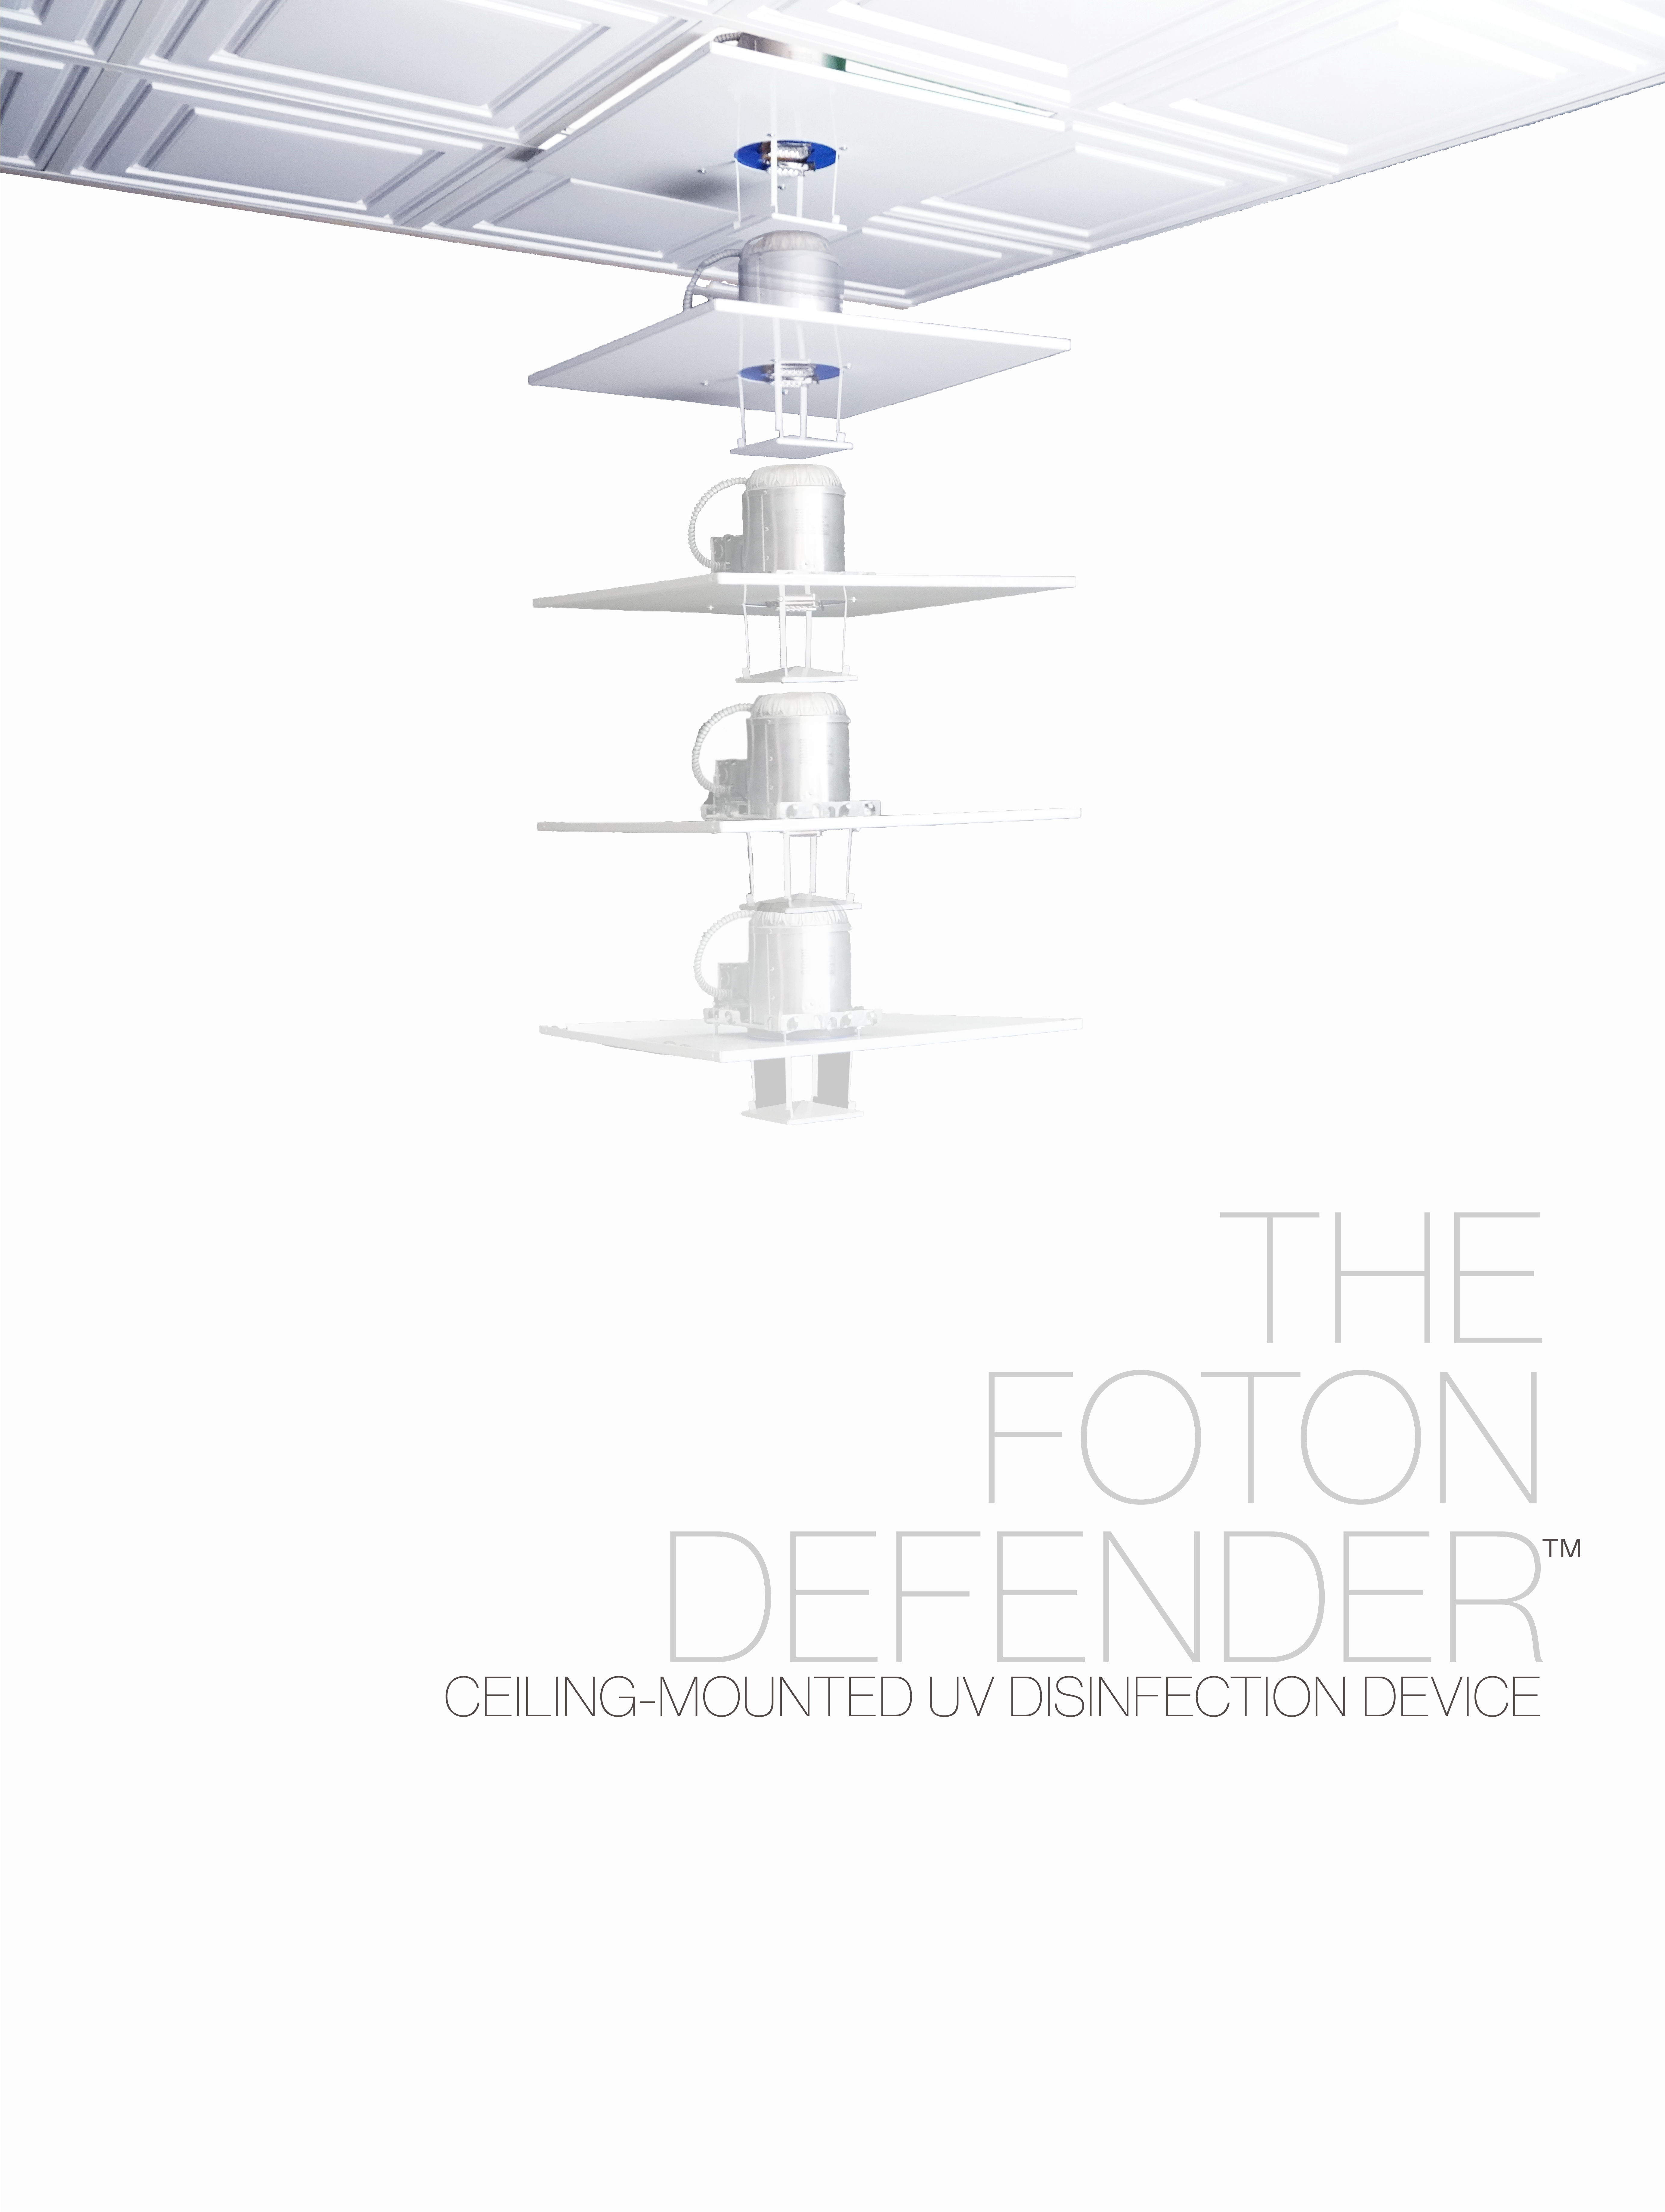 The Foton Defender ceiling-mounted UV disinfection device